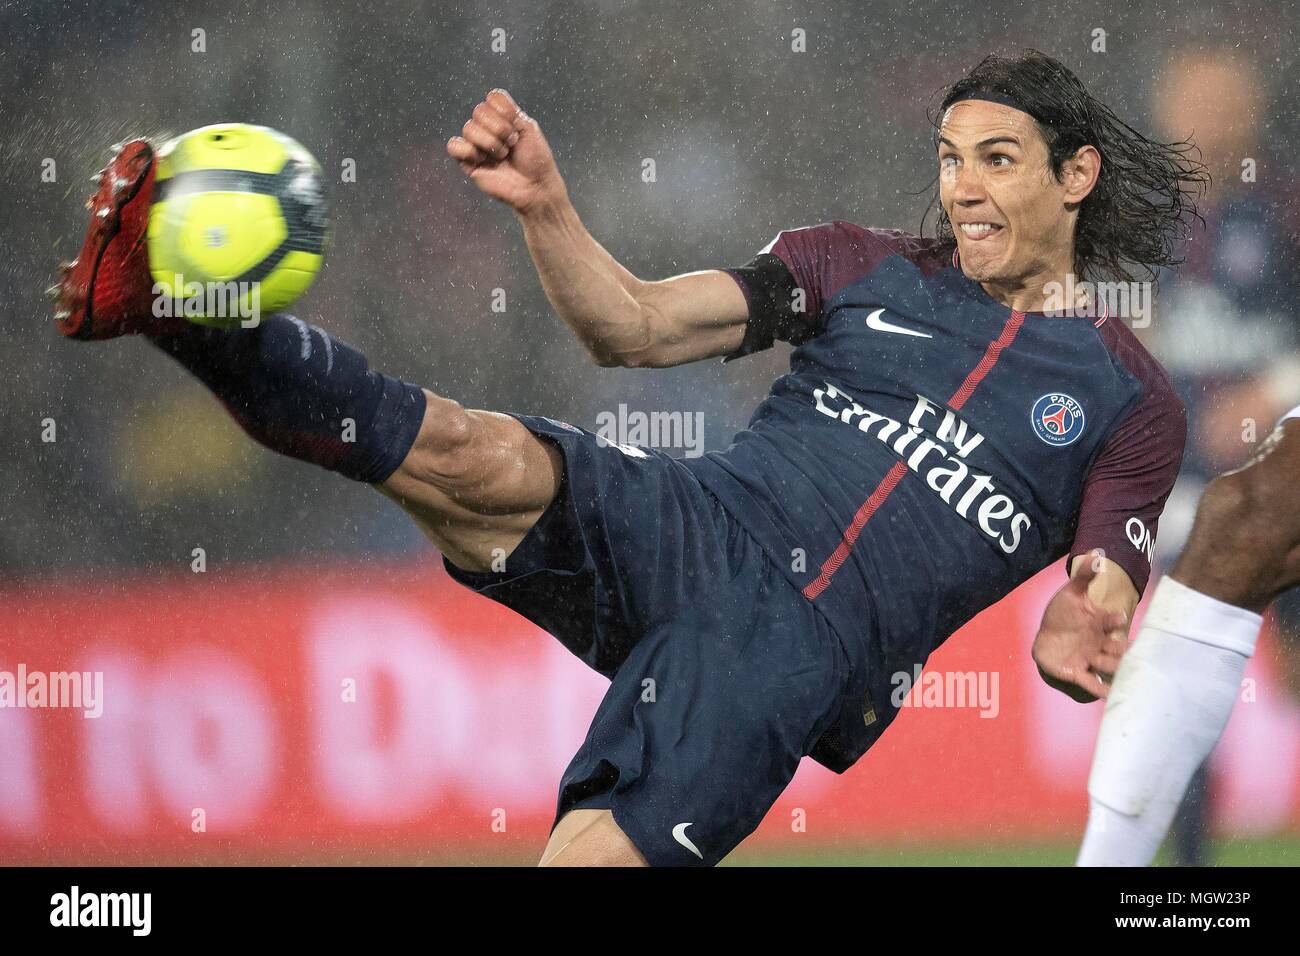 Paris. 29th Apr, 2018. Edinson Cavani from Paris Saint-Germain tries to shoot during the match against Guingamp of French Ligue 1 2017-18 season 35th round in Paris, France on April 29, 2018. Paris Saint-Germain equals Guingamp with 2-2 at home. Credit: Jack Chan/Xinhua/Alamy Live News Stock Photo